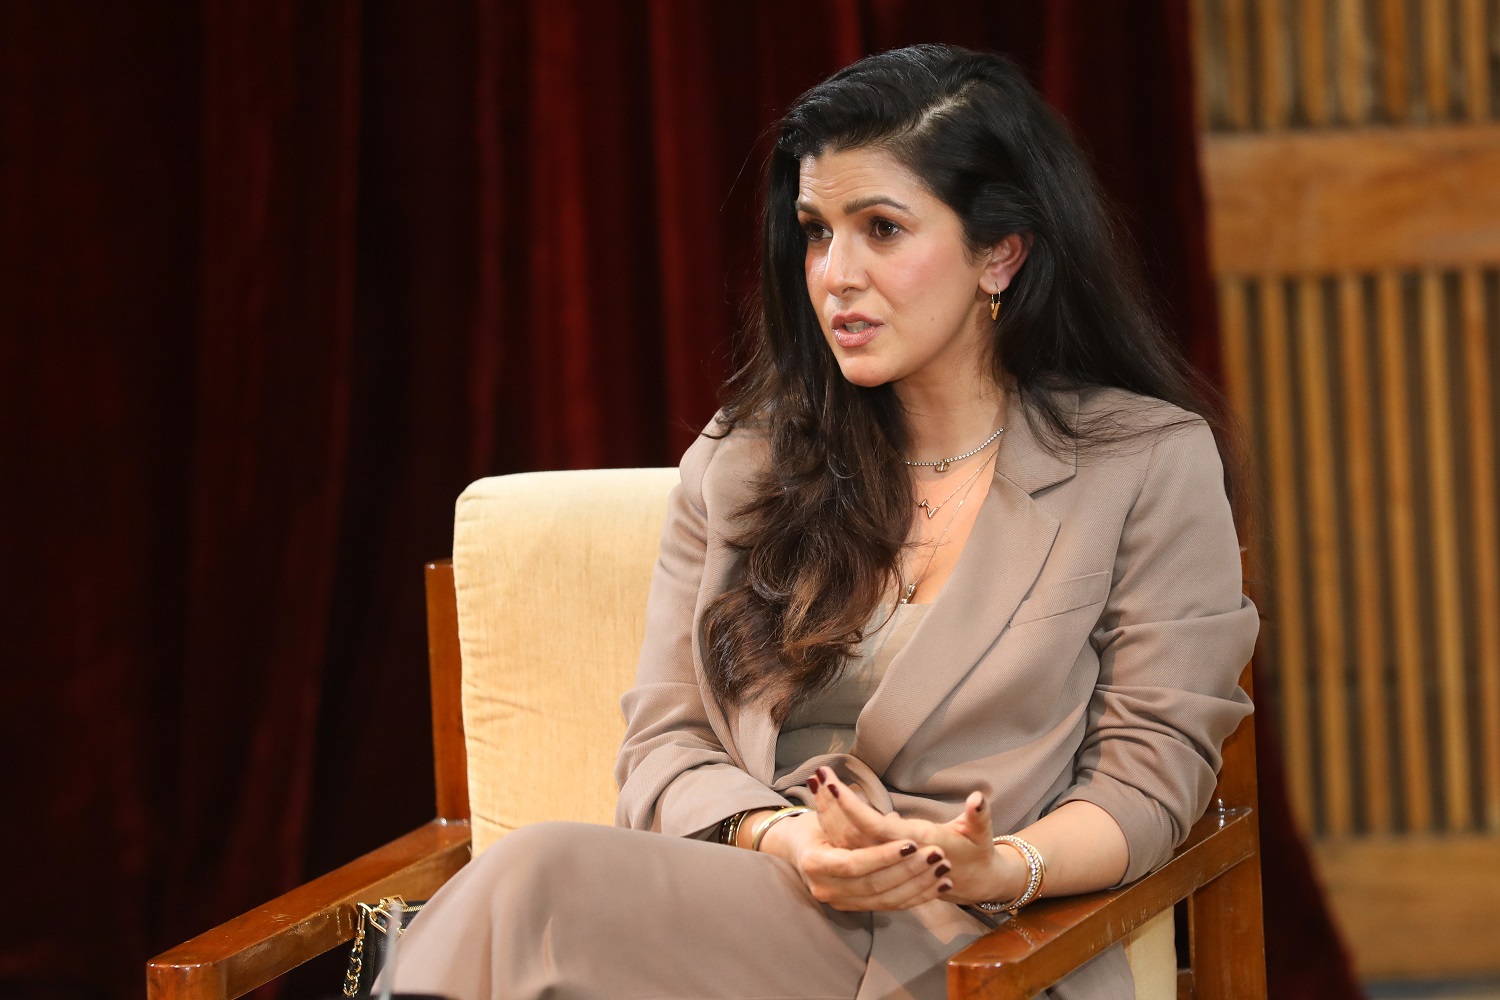 Actor Nimrat Kaur addresses the audience as part of the speaker series during Unmaad 2023, IIMB’s annual cultural festival.